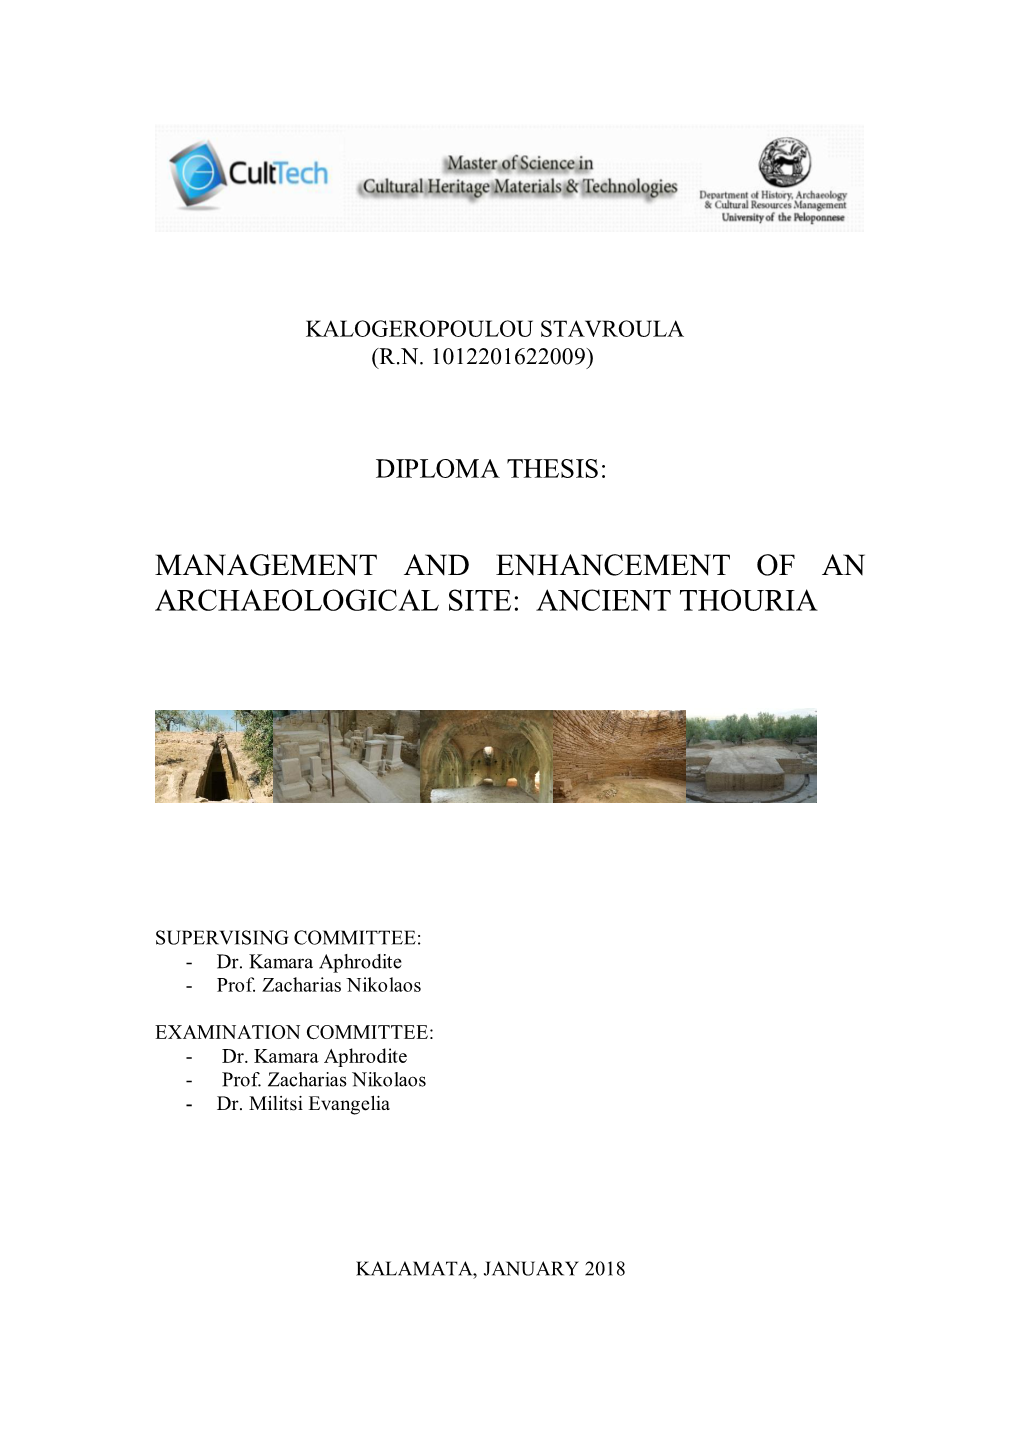 Management and Enhancement of an Archaeological Site: Ancient Thouria